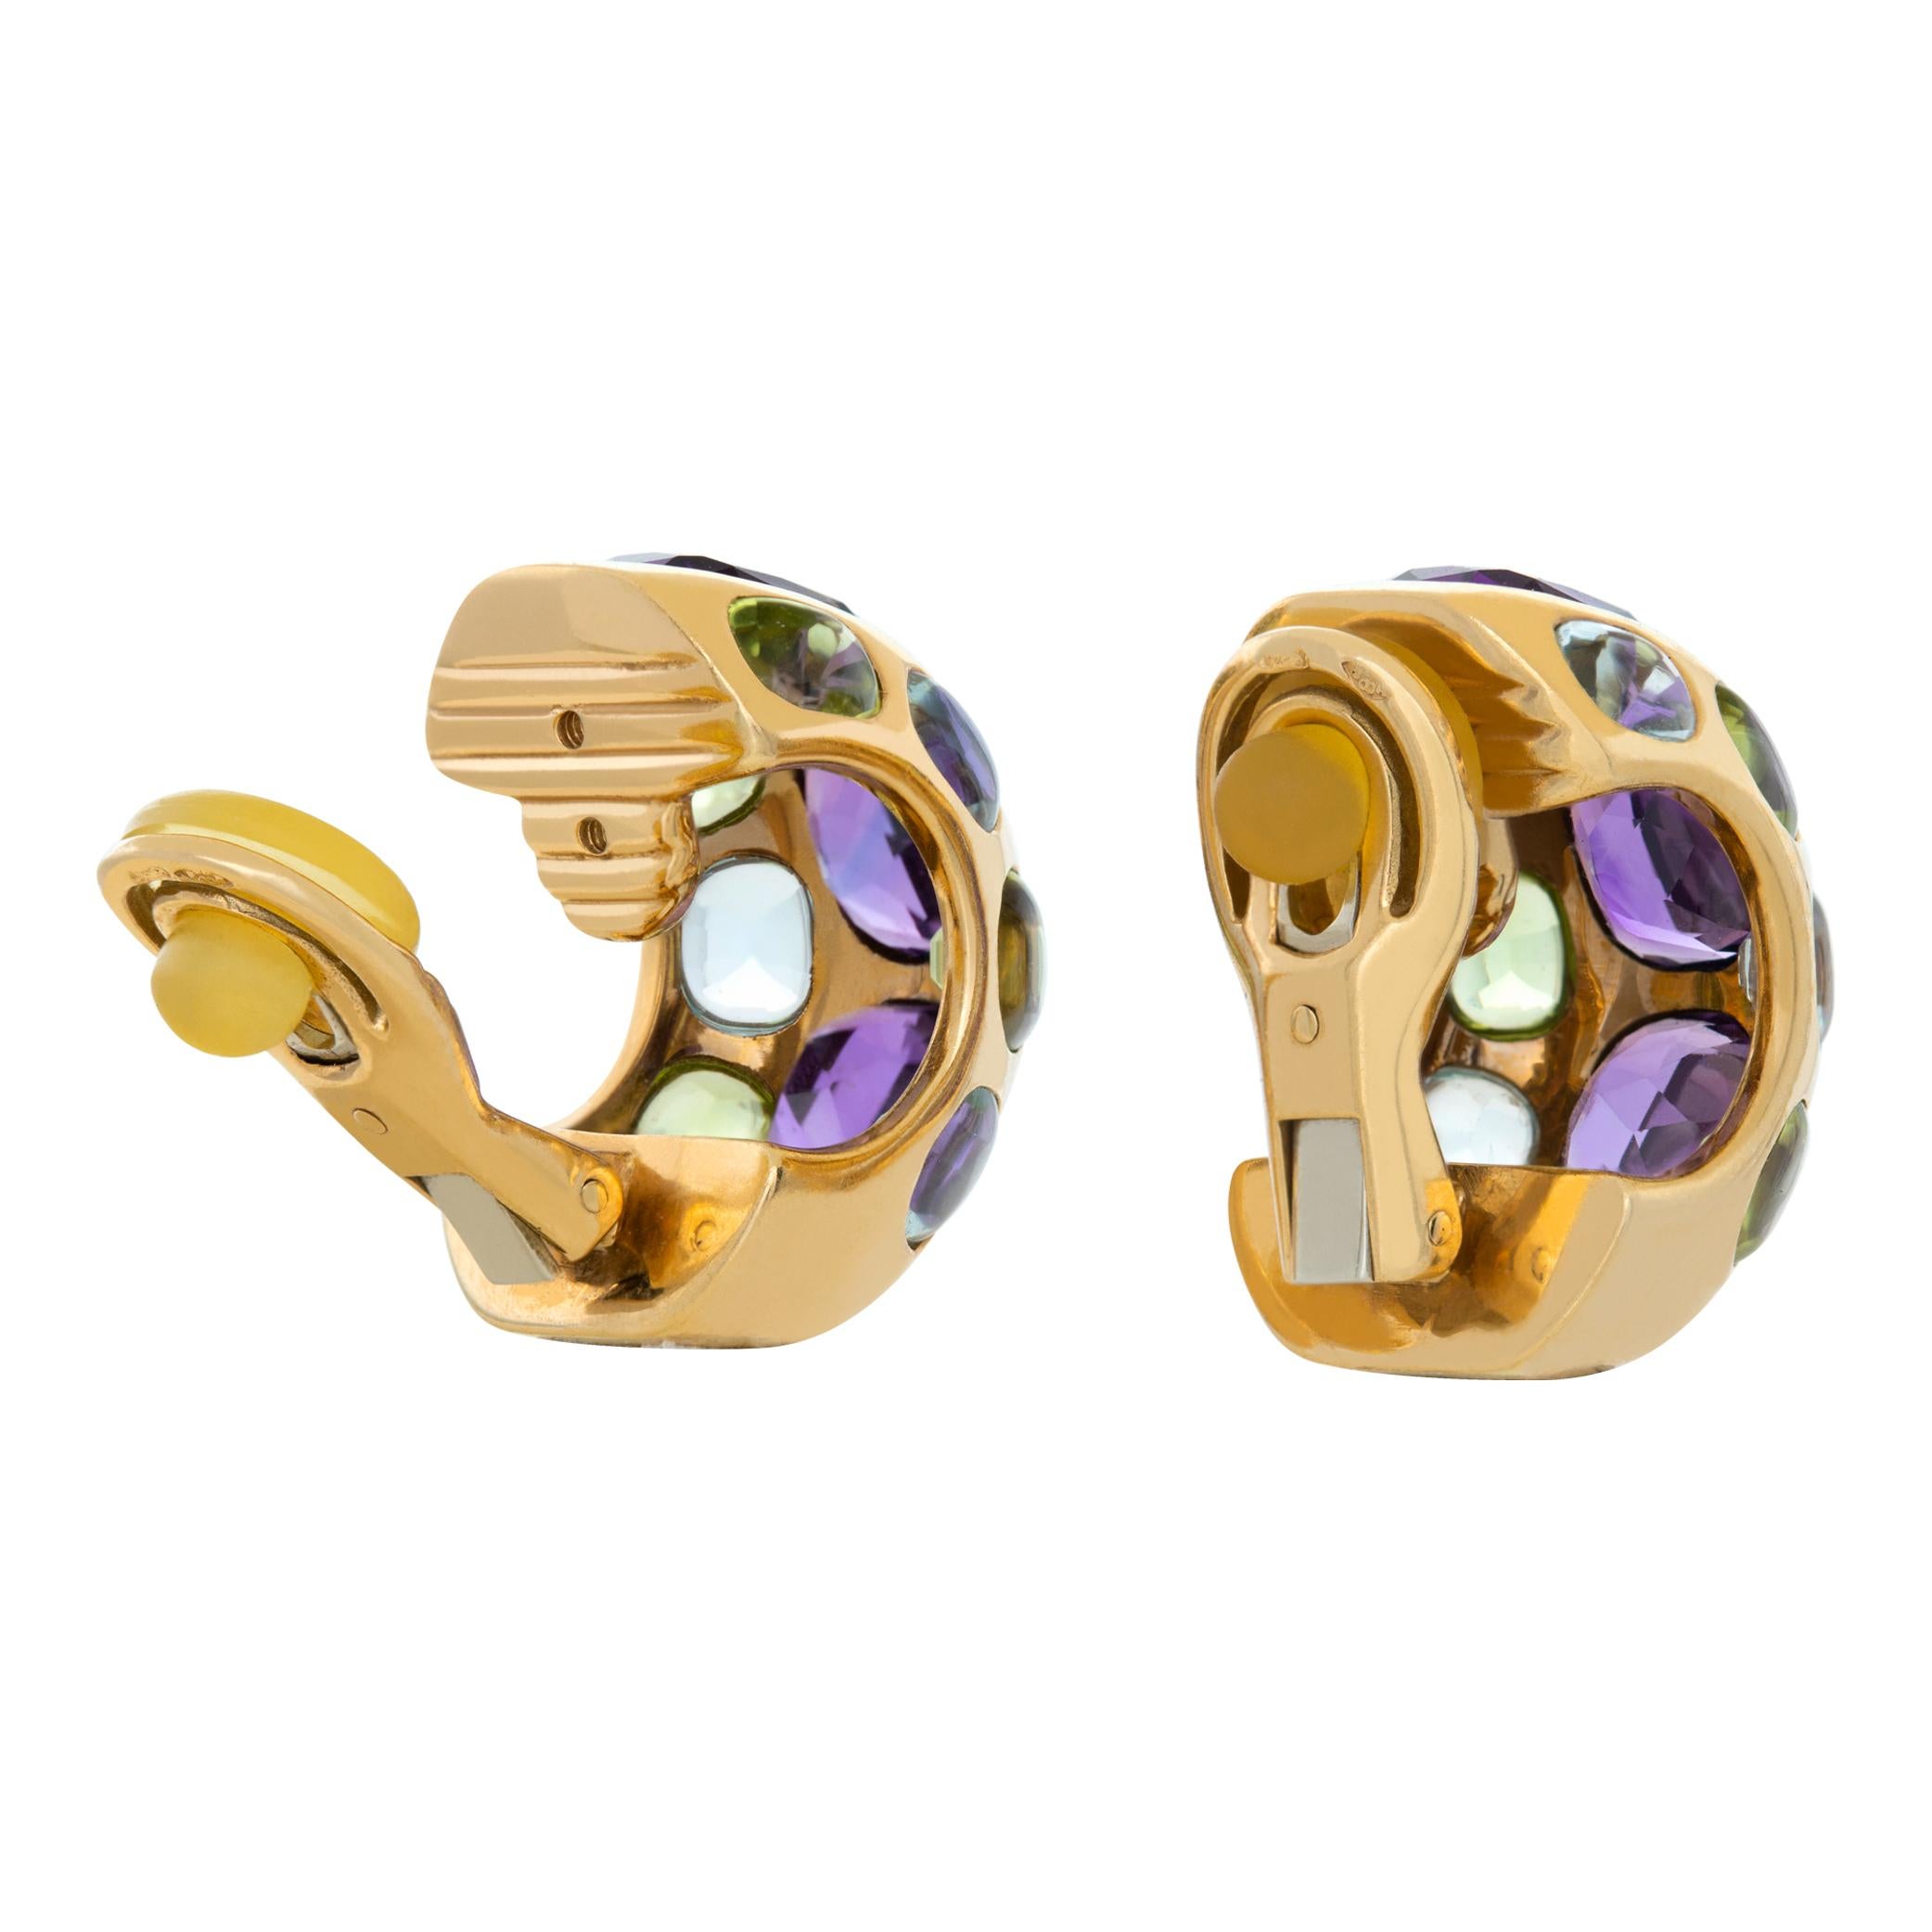 Colorful Chanel earrings with amethyst, peridot and aquamarine in 18k yellow gold. Clip on (post can be added). Width: 0.5 inches. Length: 0.85 inches.